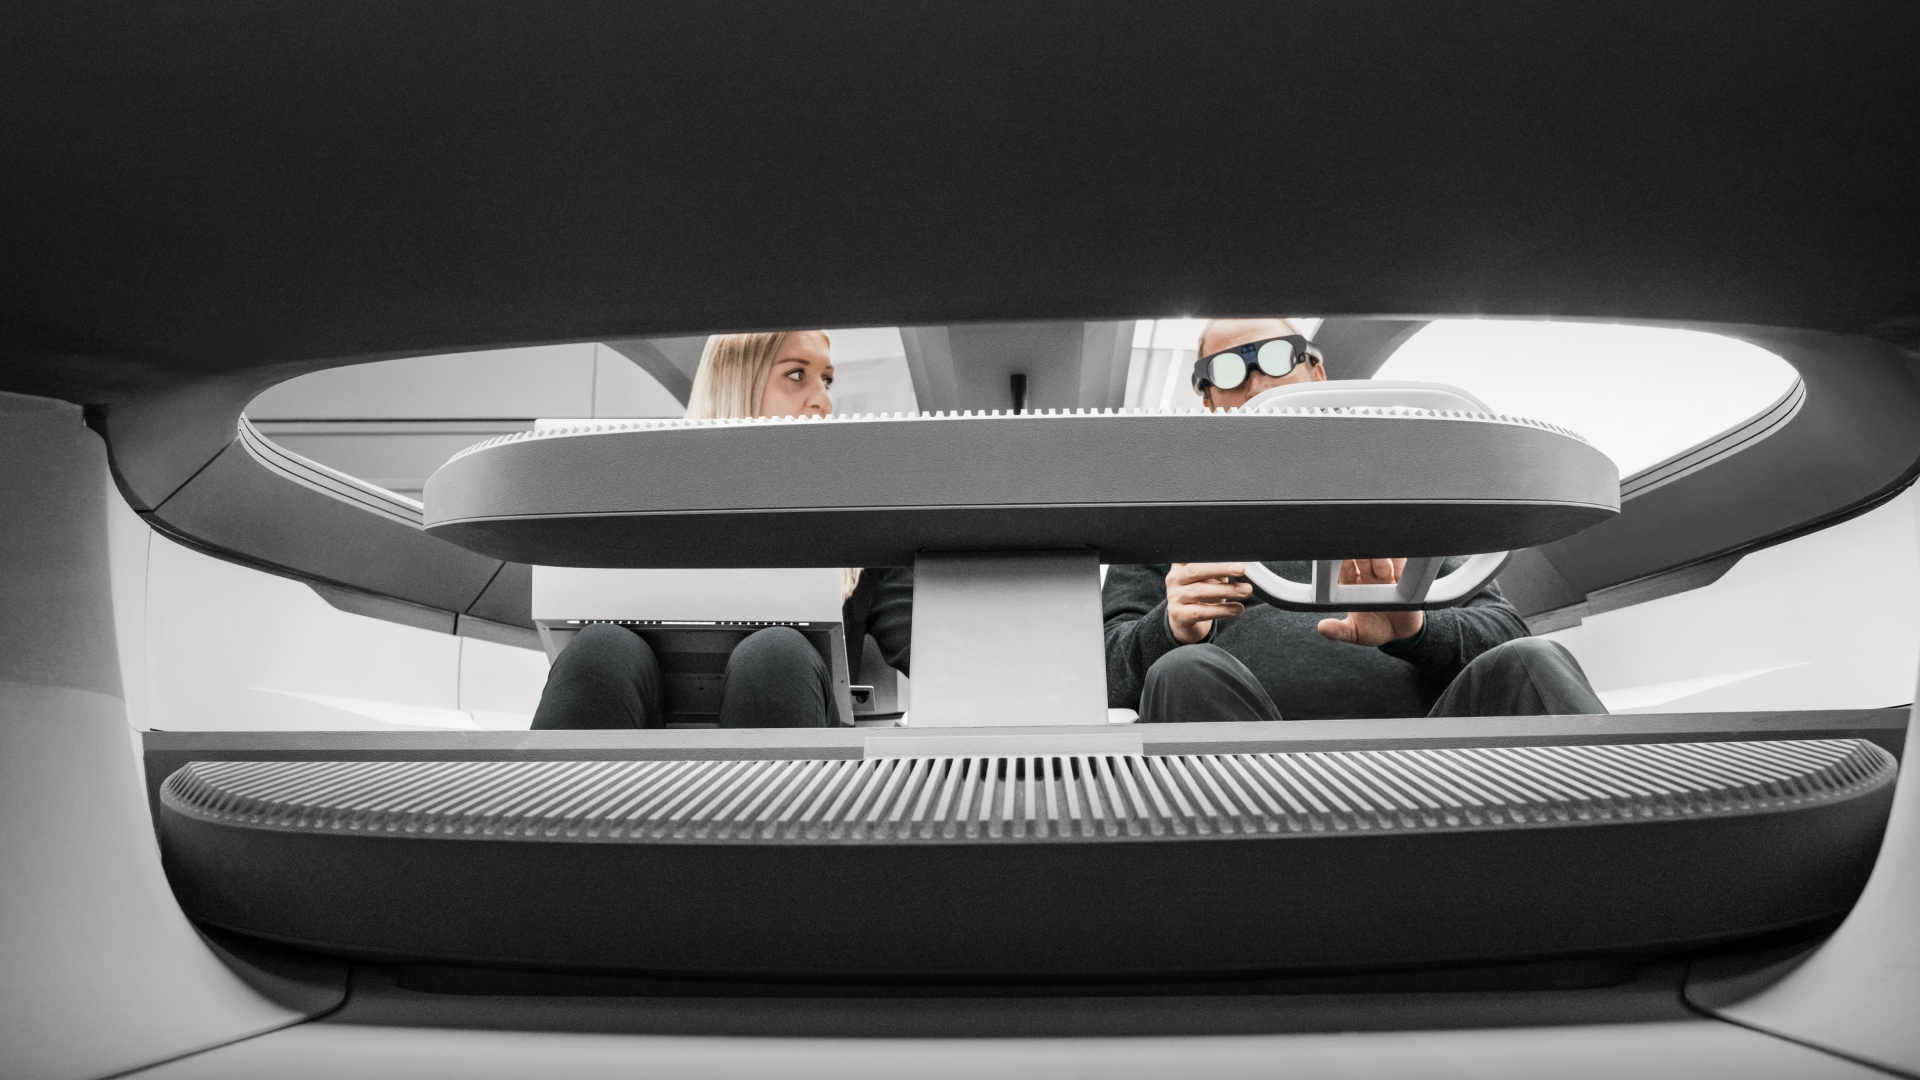 A look into the cockpit of the Audi activesphere concept.